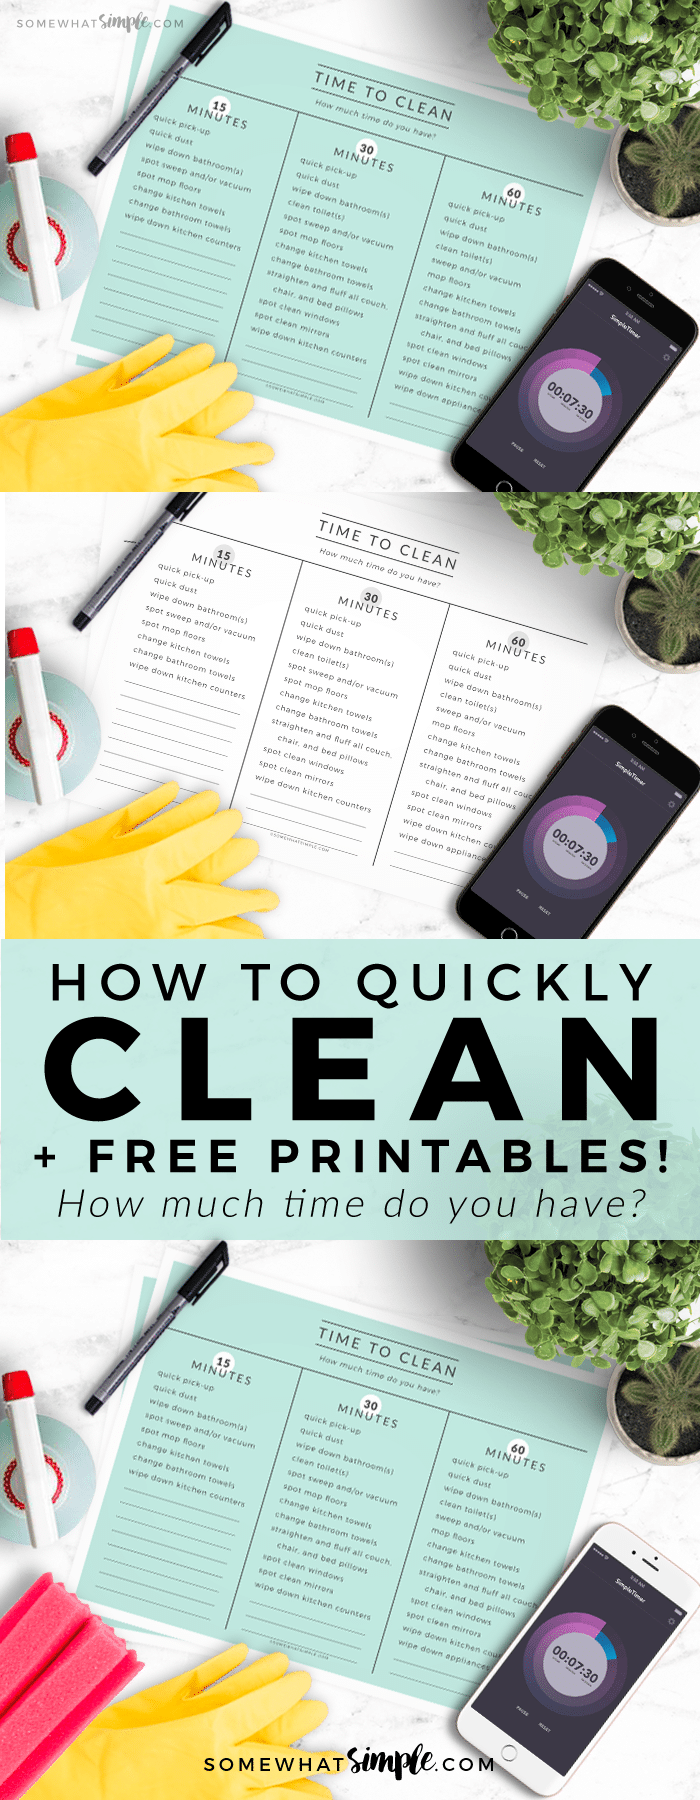 https://www.somewhatsimple.com/wp-content/uploads/2014/08/how-to-quickly-clean-your-home-printables.png